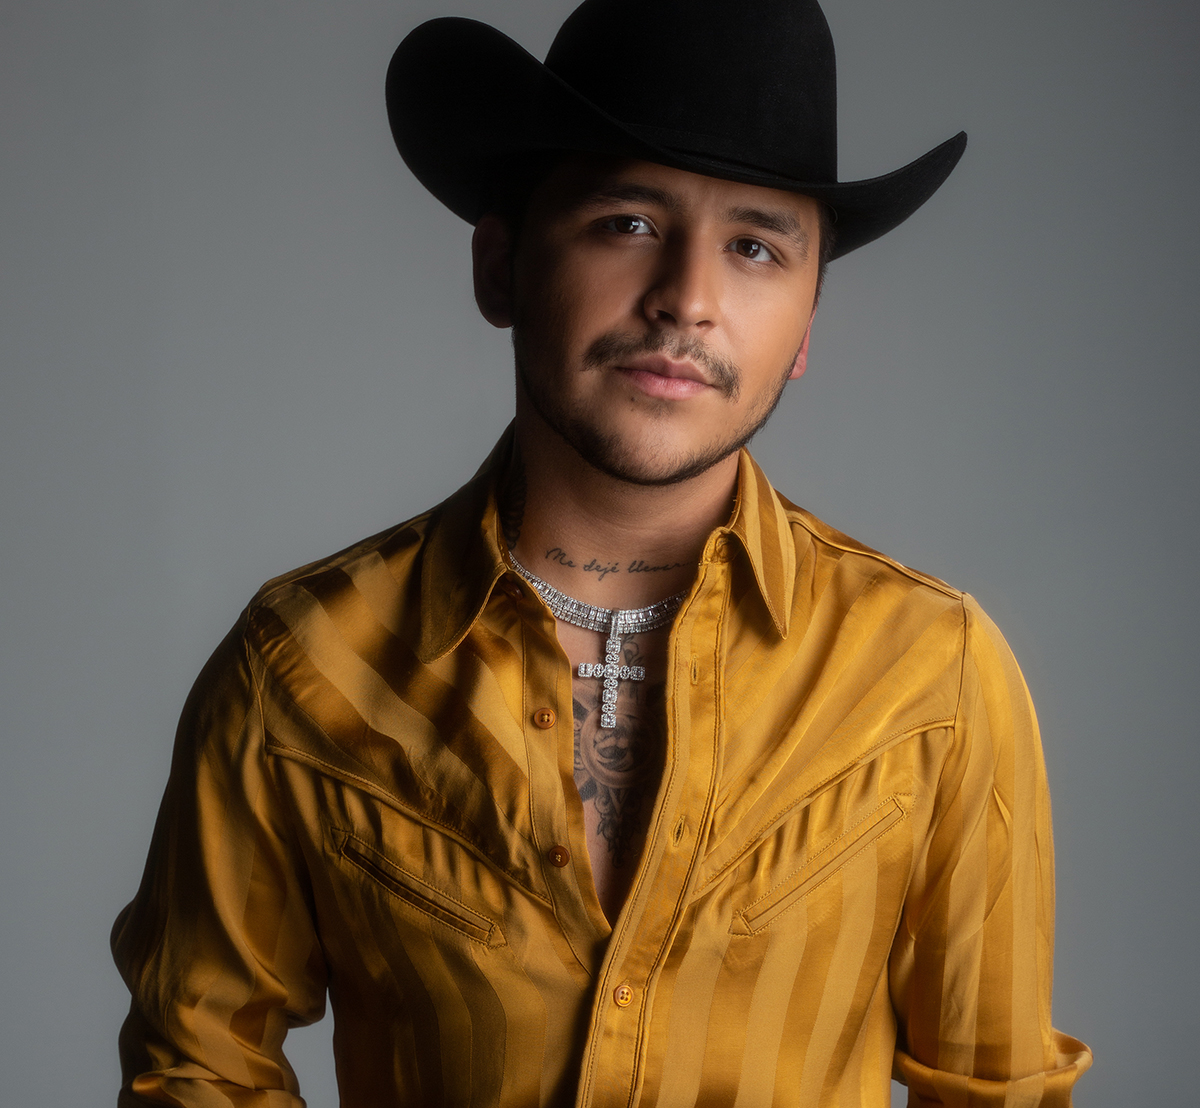 Christian Nodal shows his face and talks about the cancellation of the concert in the Valle de Guadalupe